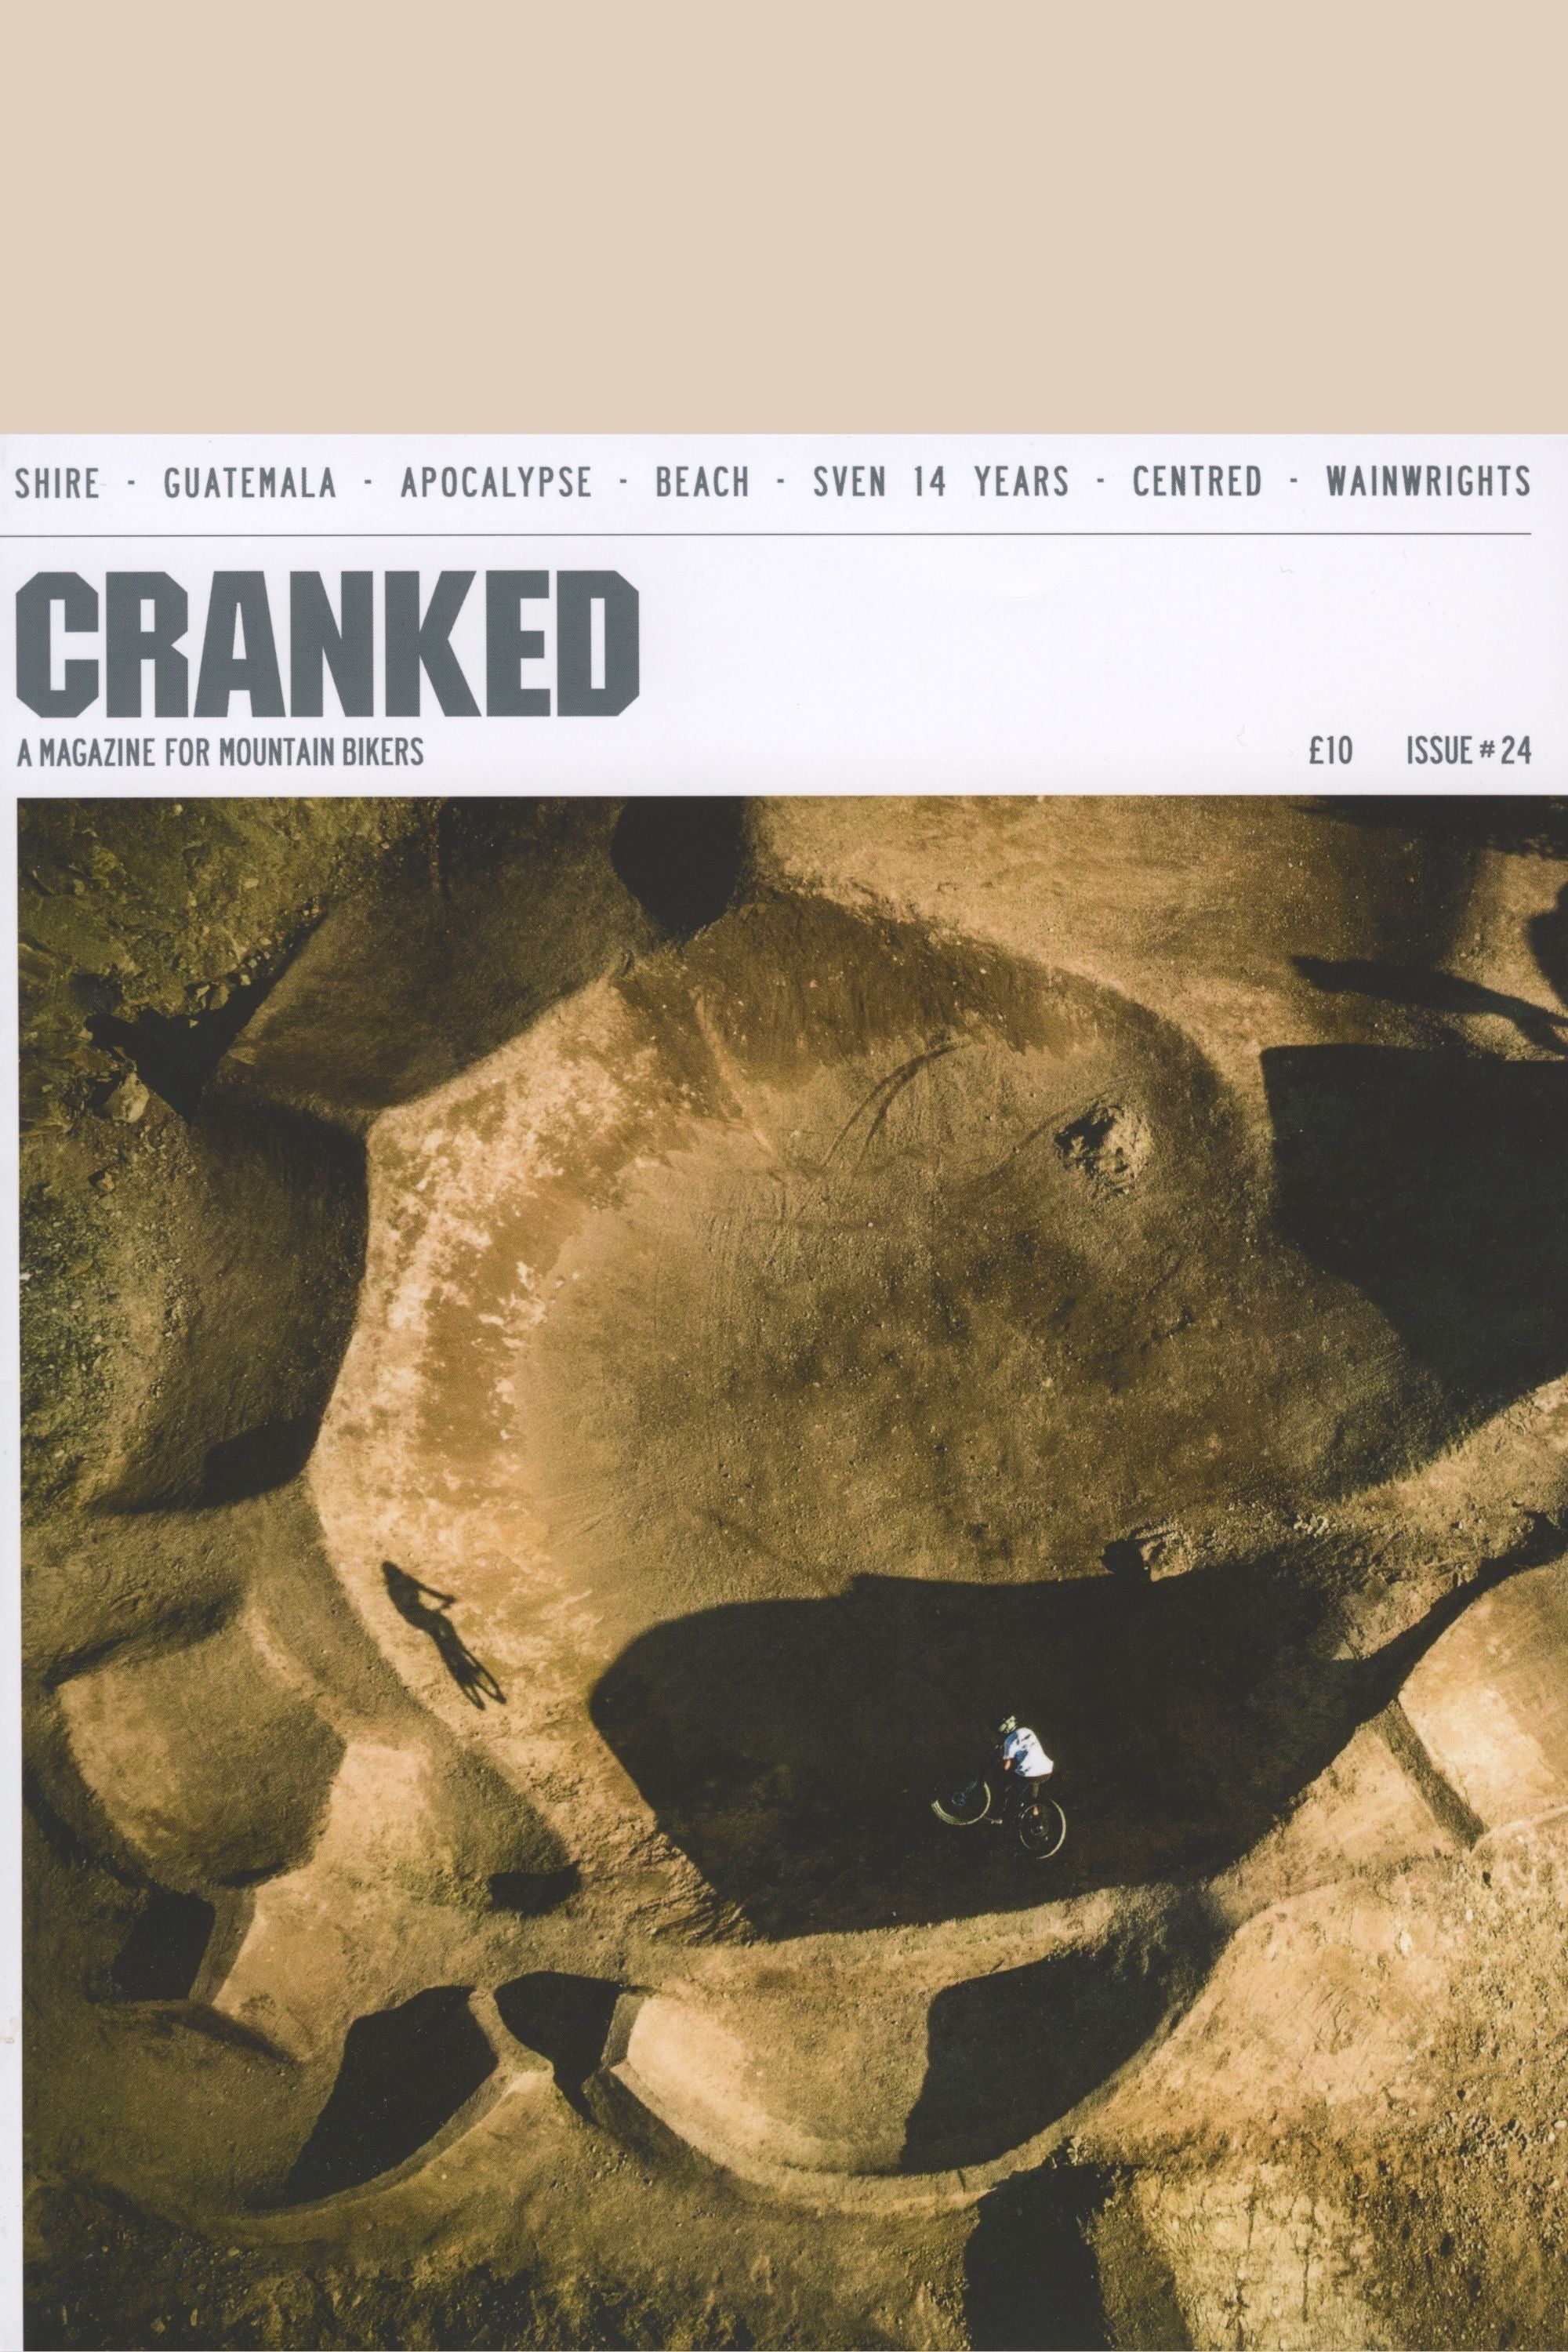 Cranked Magazine issue 24 front cover